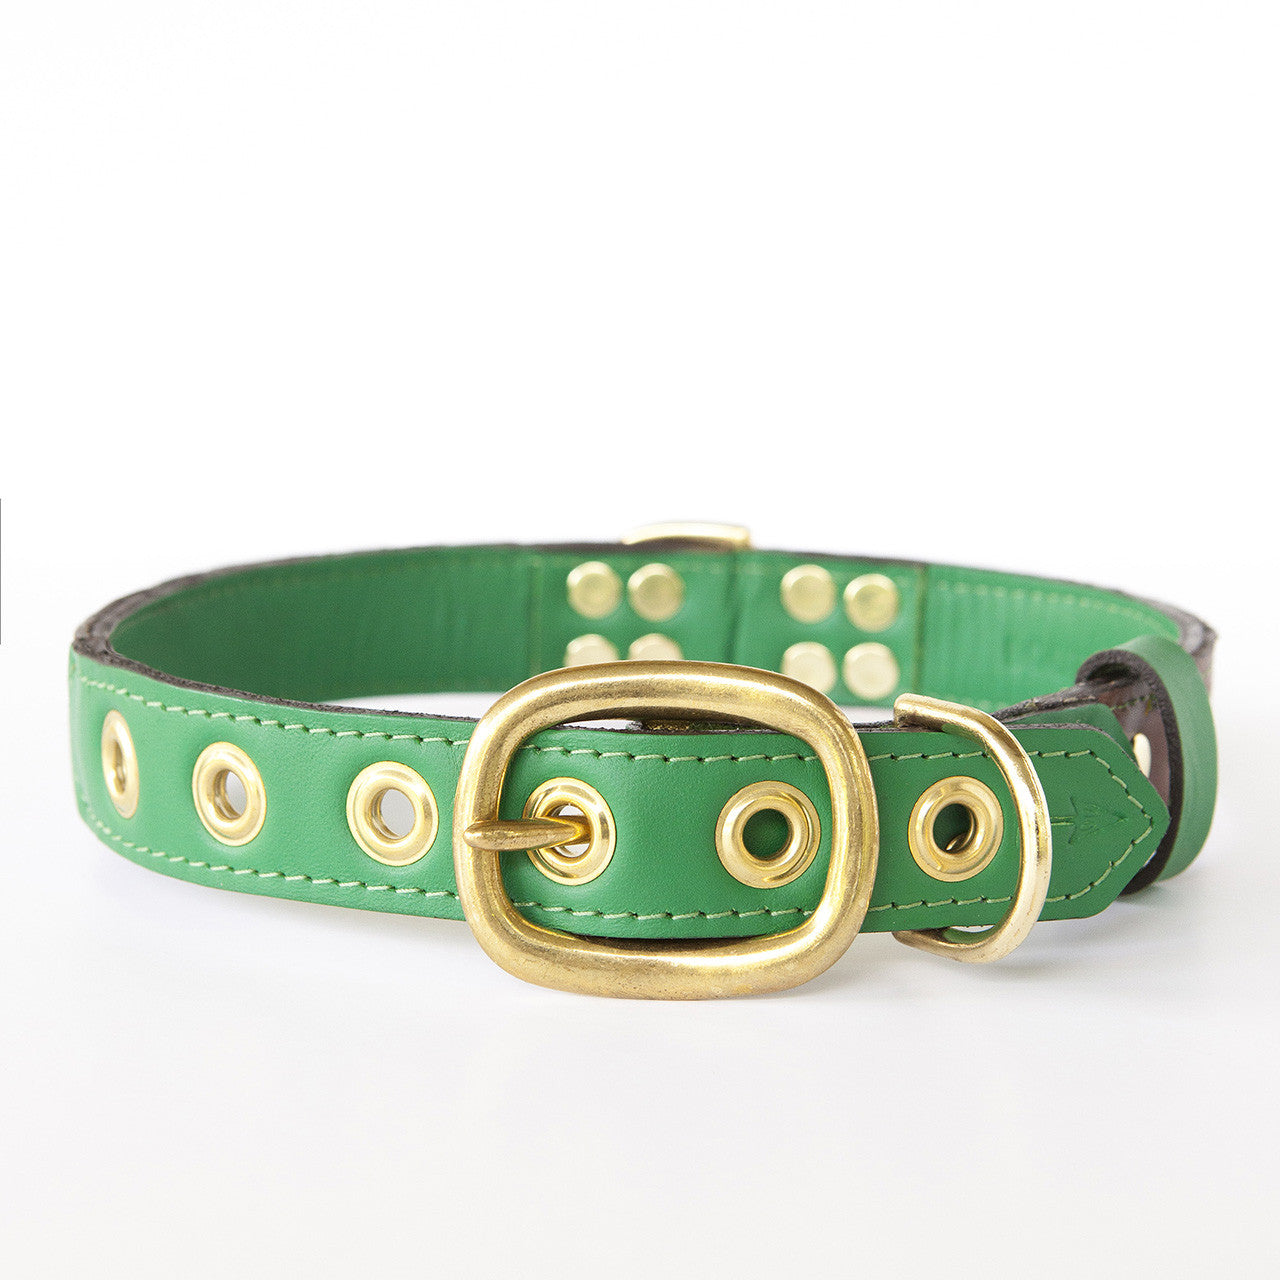 Emerald Green Dog Collar with Chocolate Leather + Green and Yellow Spike Stitching (back view)